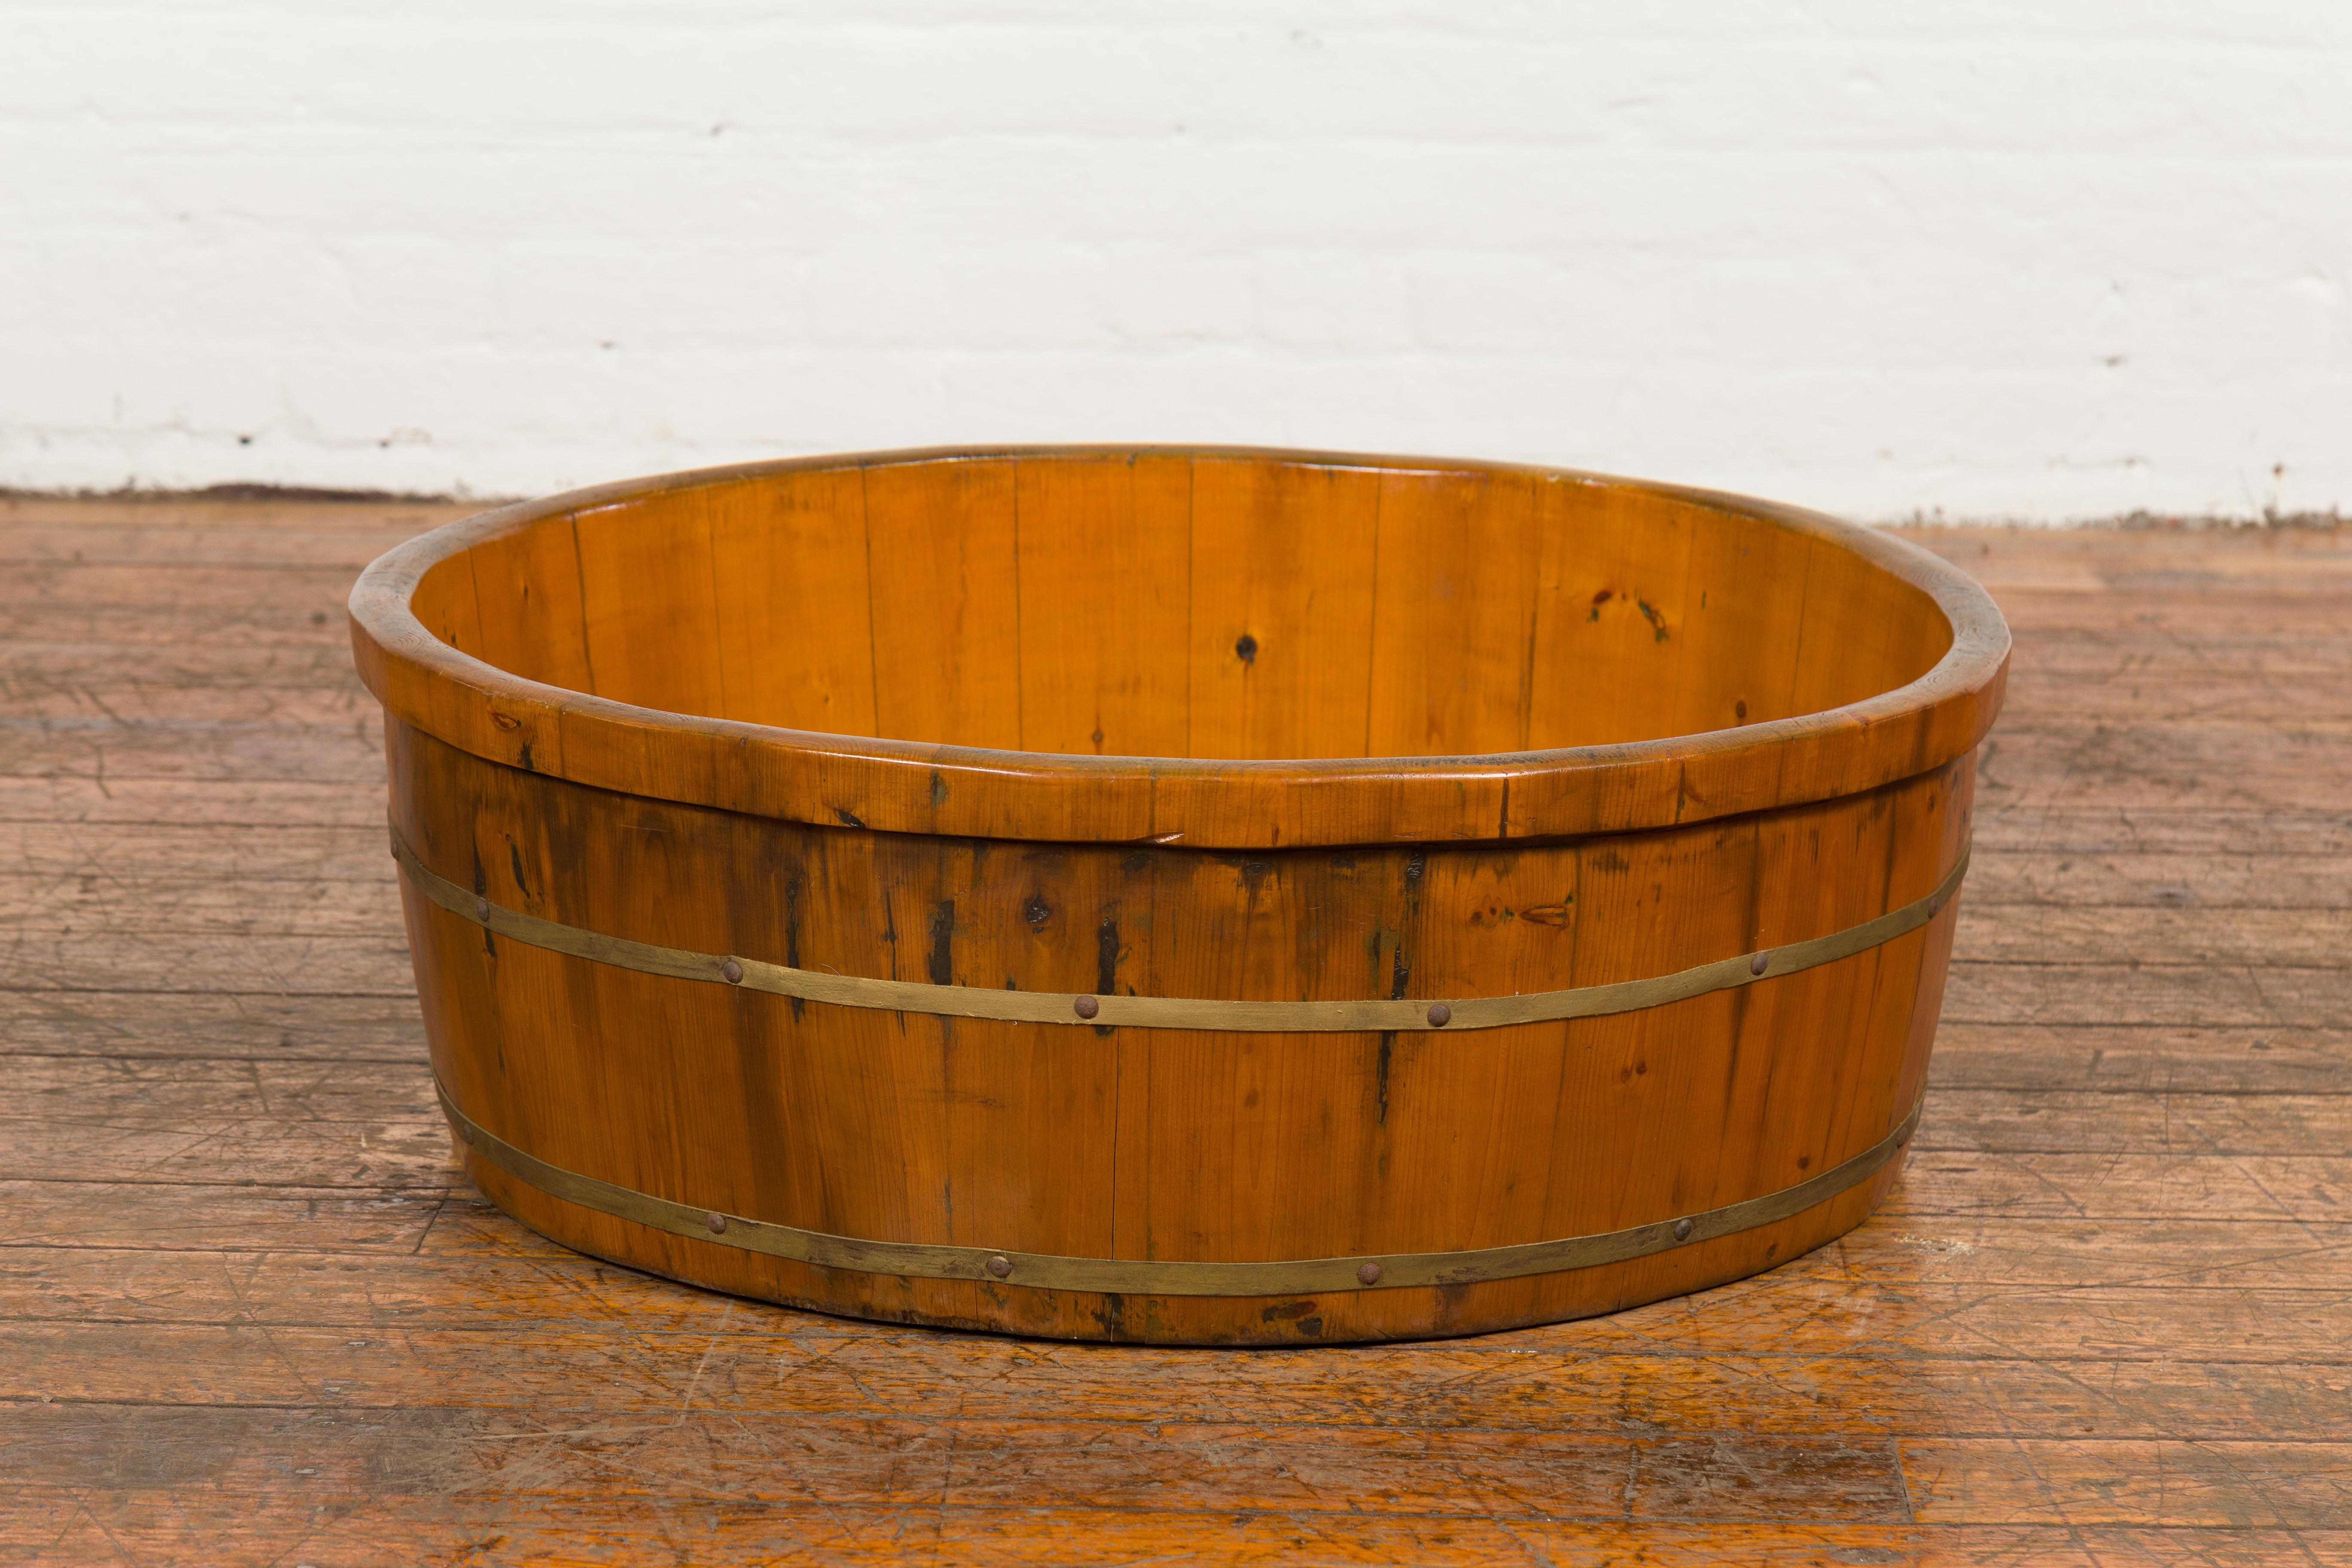 A large Chinese Qing Dynasty period elm wood rice tray from the 19th century with brass braces and honey color. Crafted in China during the Qing dynasty period in the 19th century, this elm rice tray features a circular body topped with a thin lip